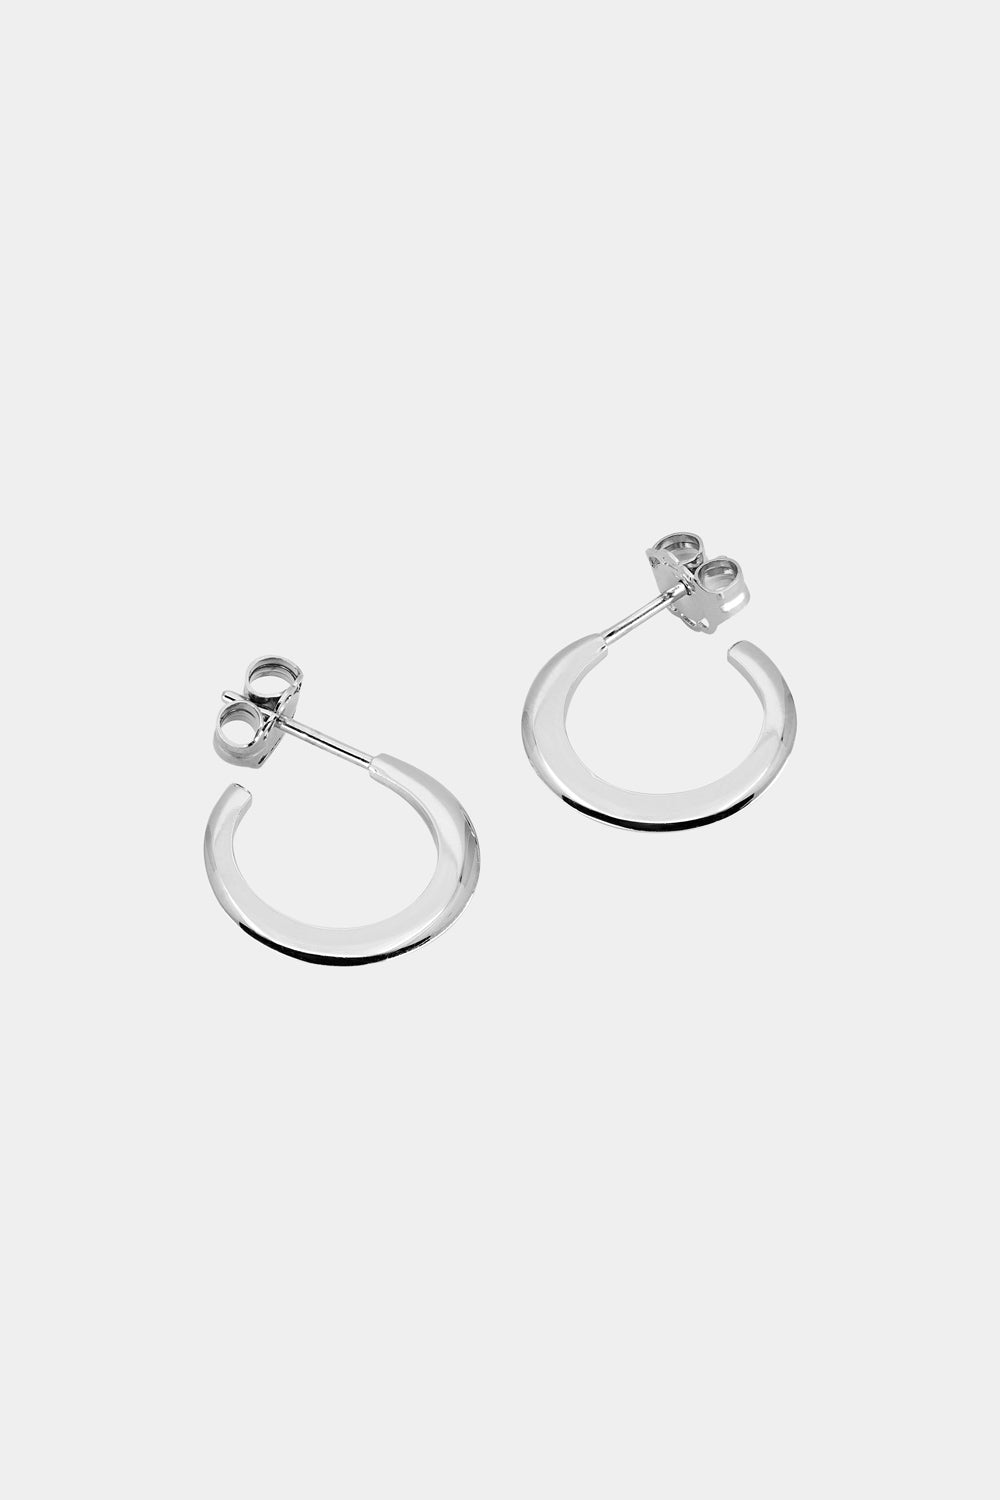 Mini Single Band Hoops | Silver or 9K White Gold, More Options Available| Natasha Schweitzer